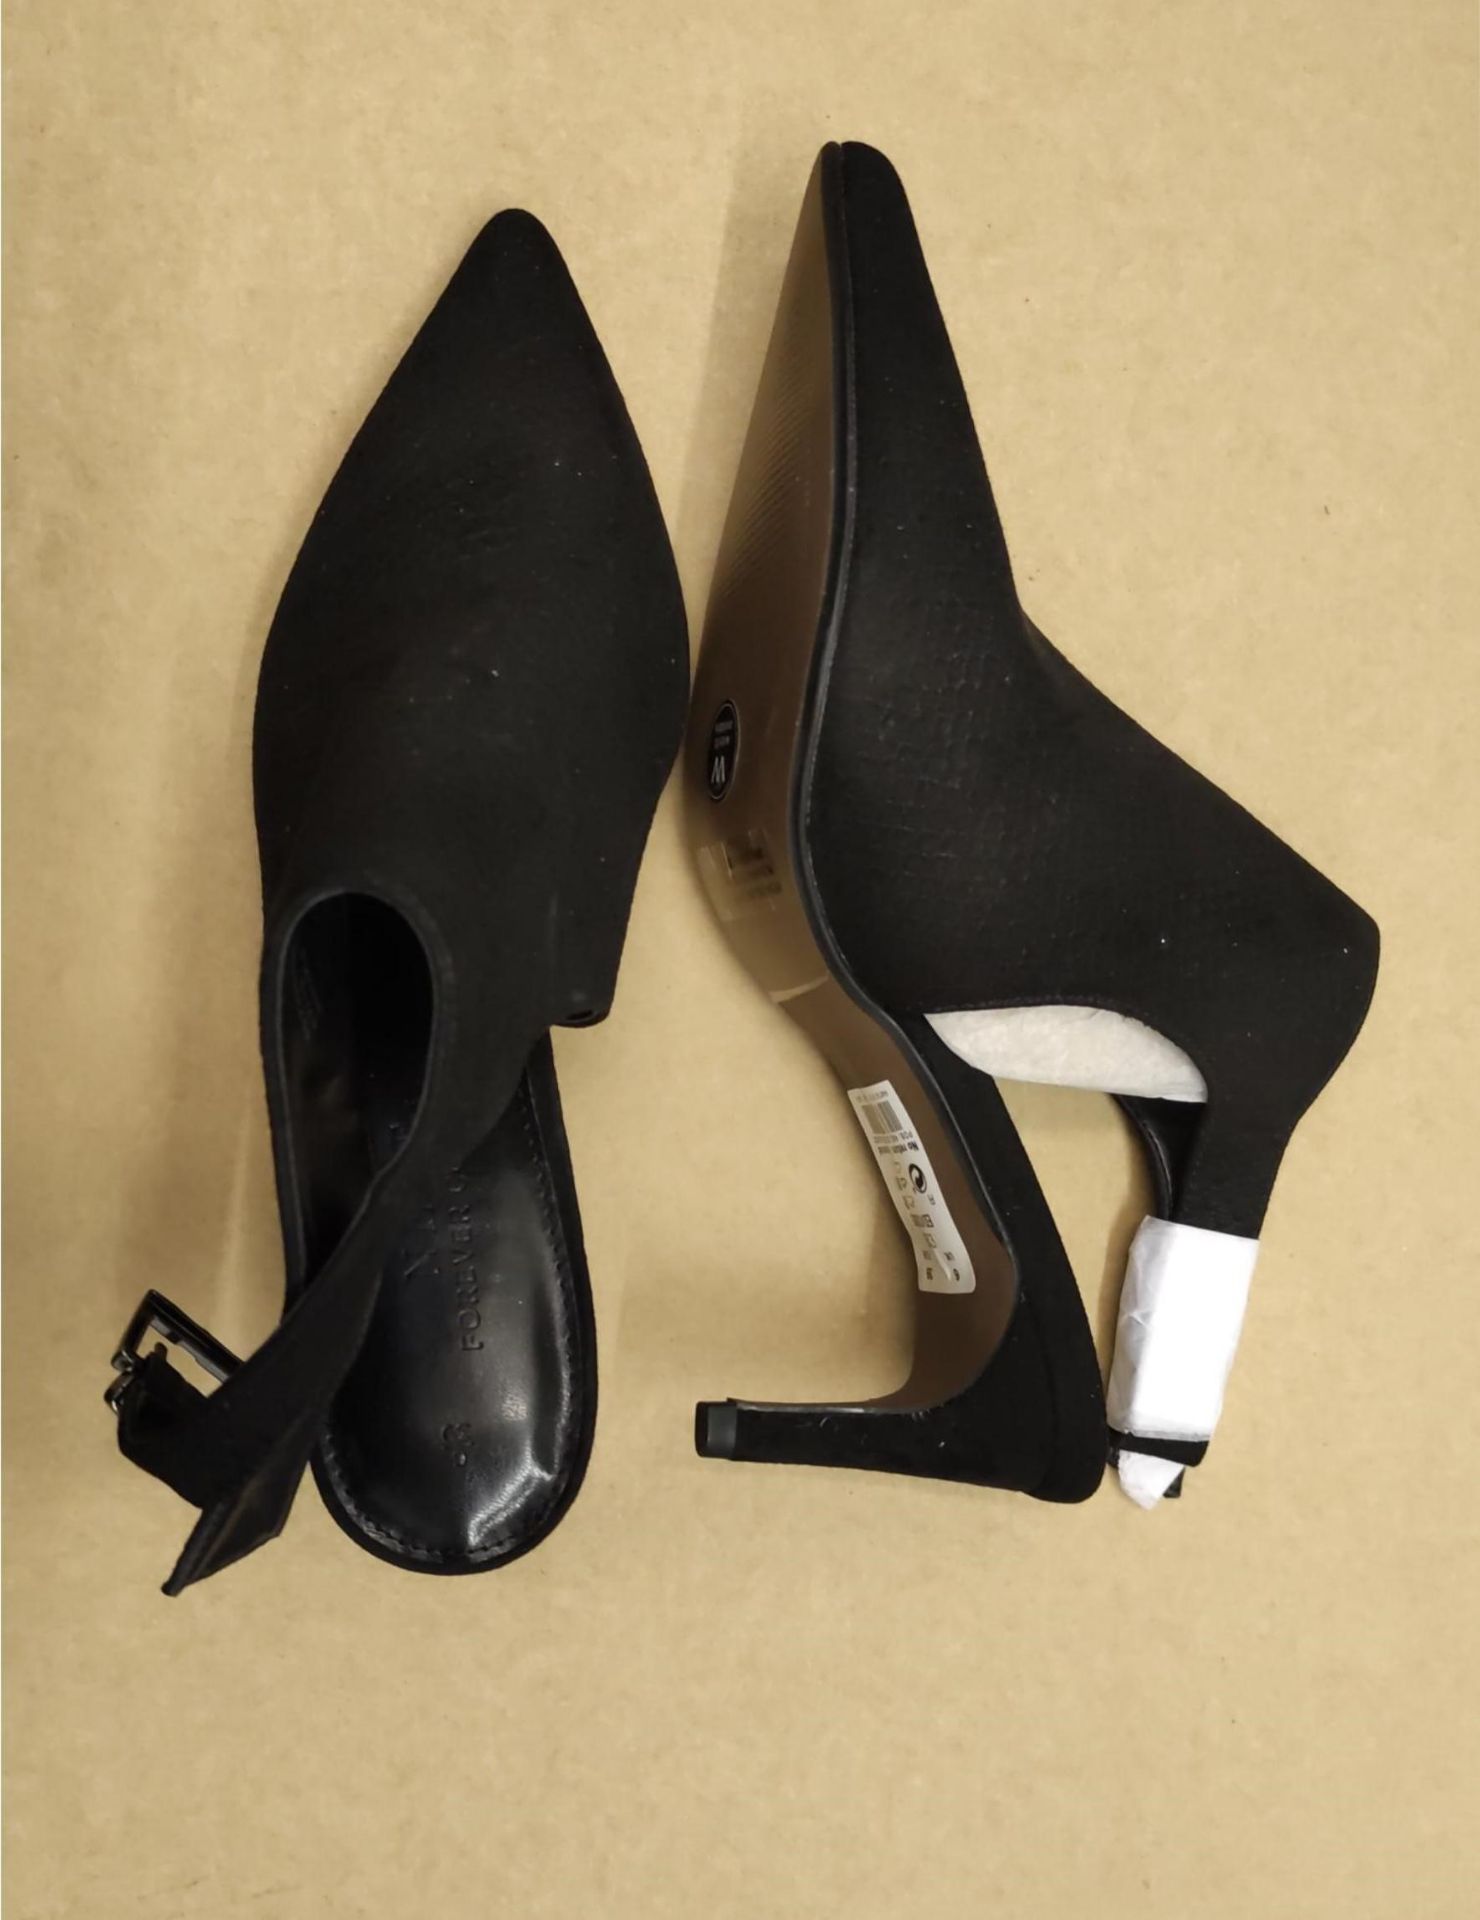 1 X UNBOXED BLACK SLINGBACK HEELS SIZE 6 £38Condition ReportALL ITEMS ARE BRAND NEW WITH TAGS UNLESS